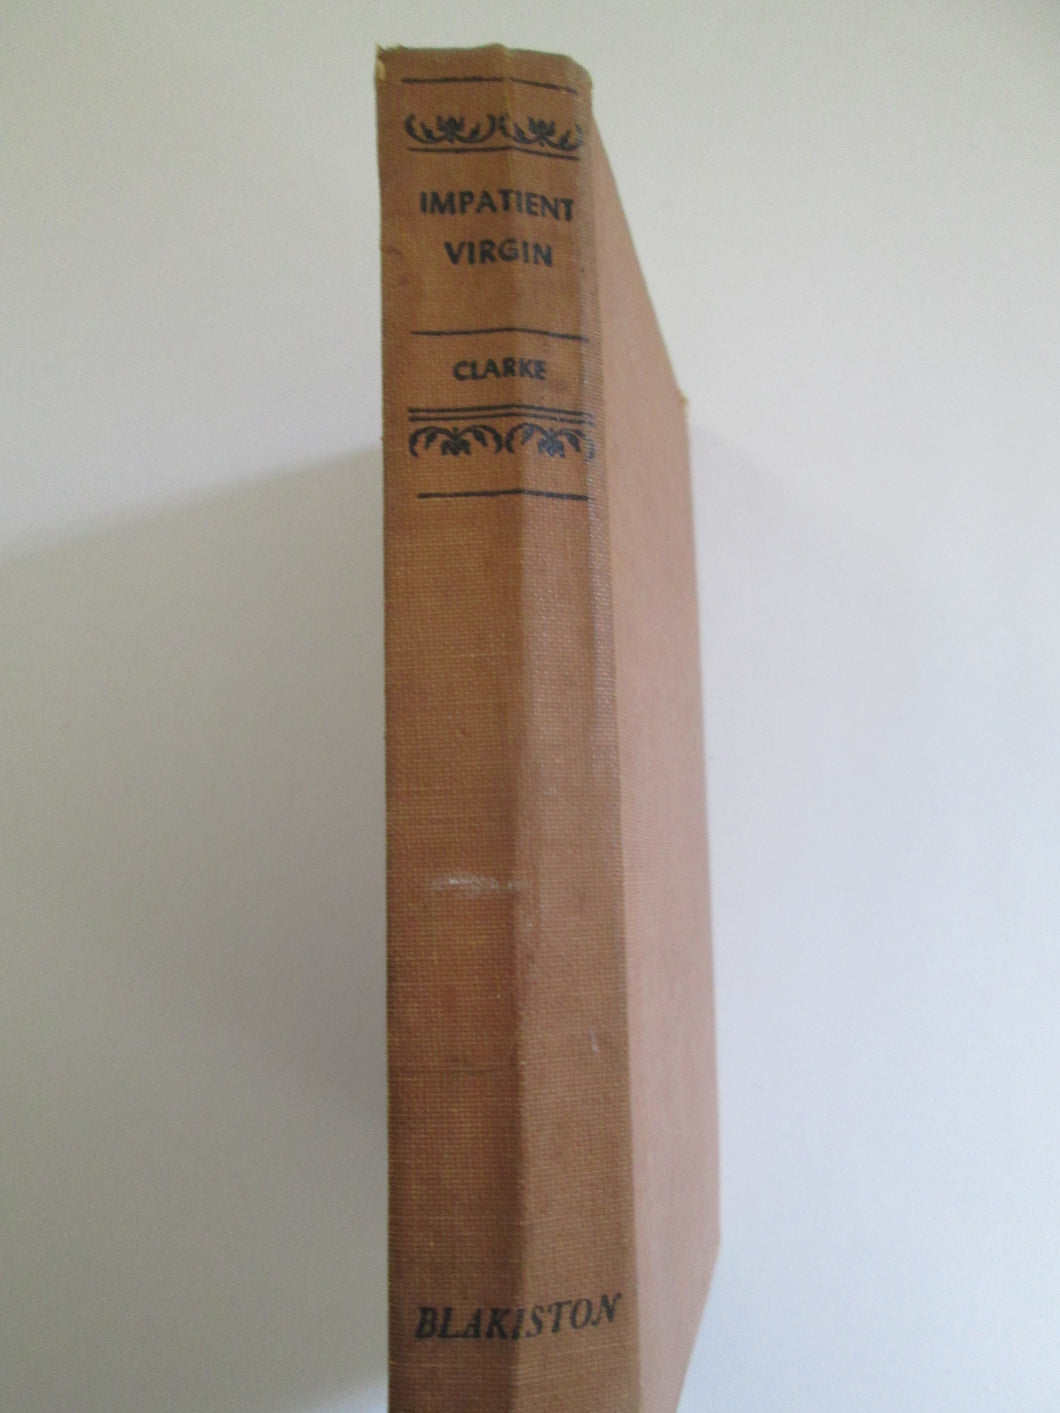 Impatient Virgin by Donald Clarke HC 1931 First Edition